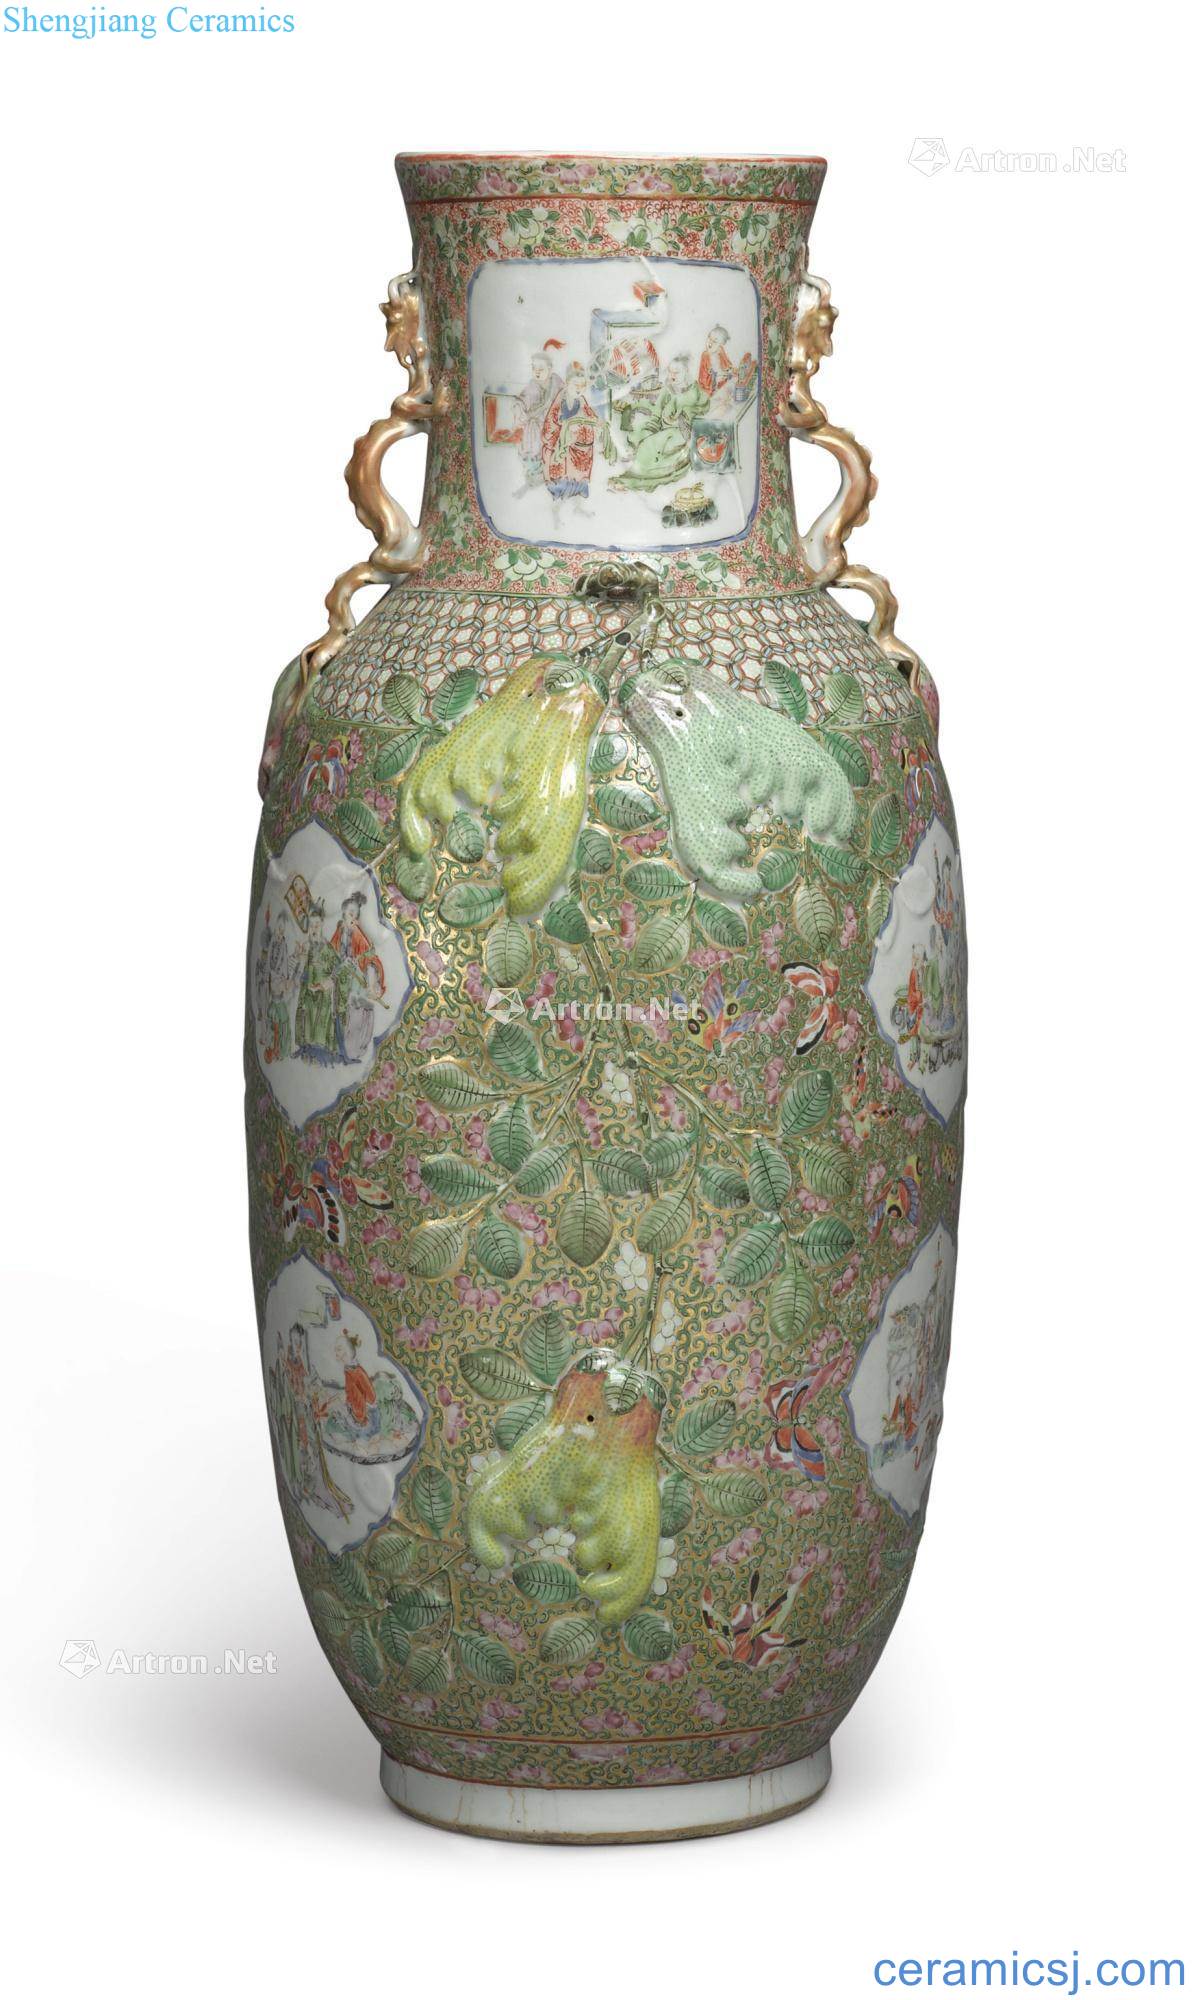 Famille rose sanduo grain medallion in the late qing dynasty vase with a dragon